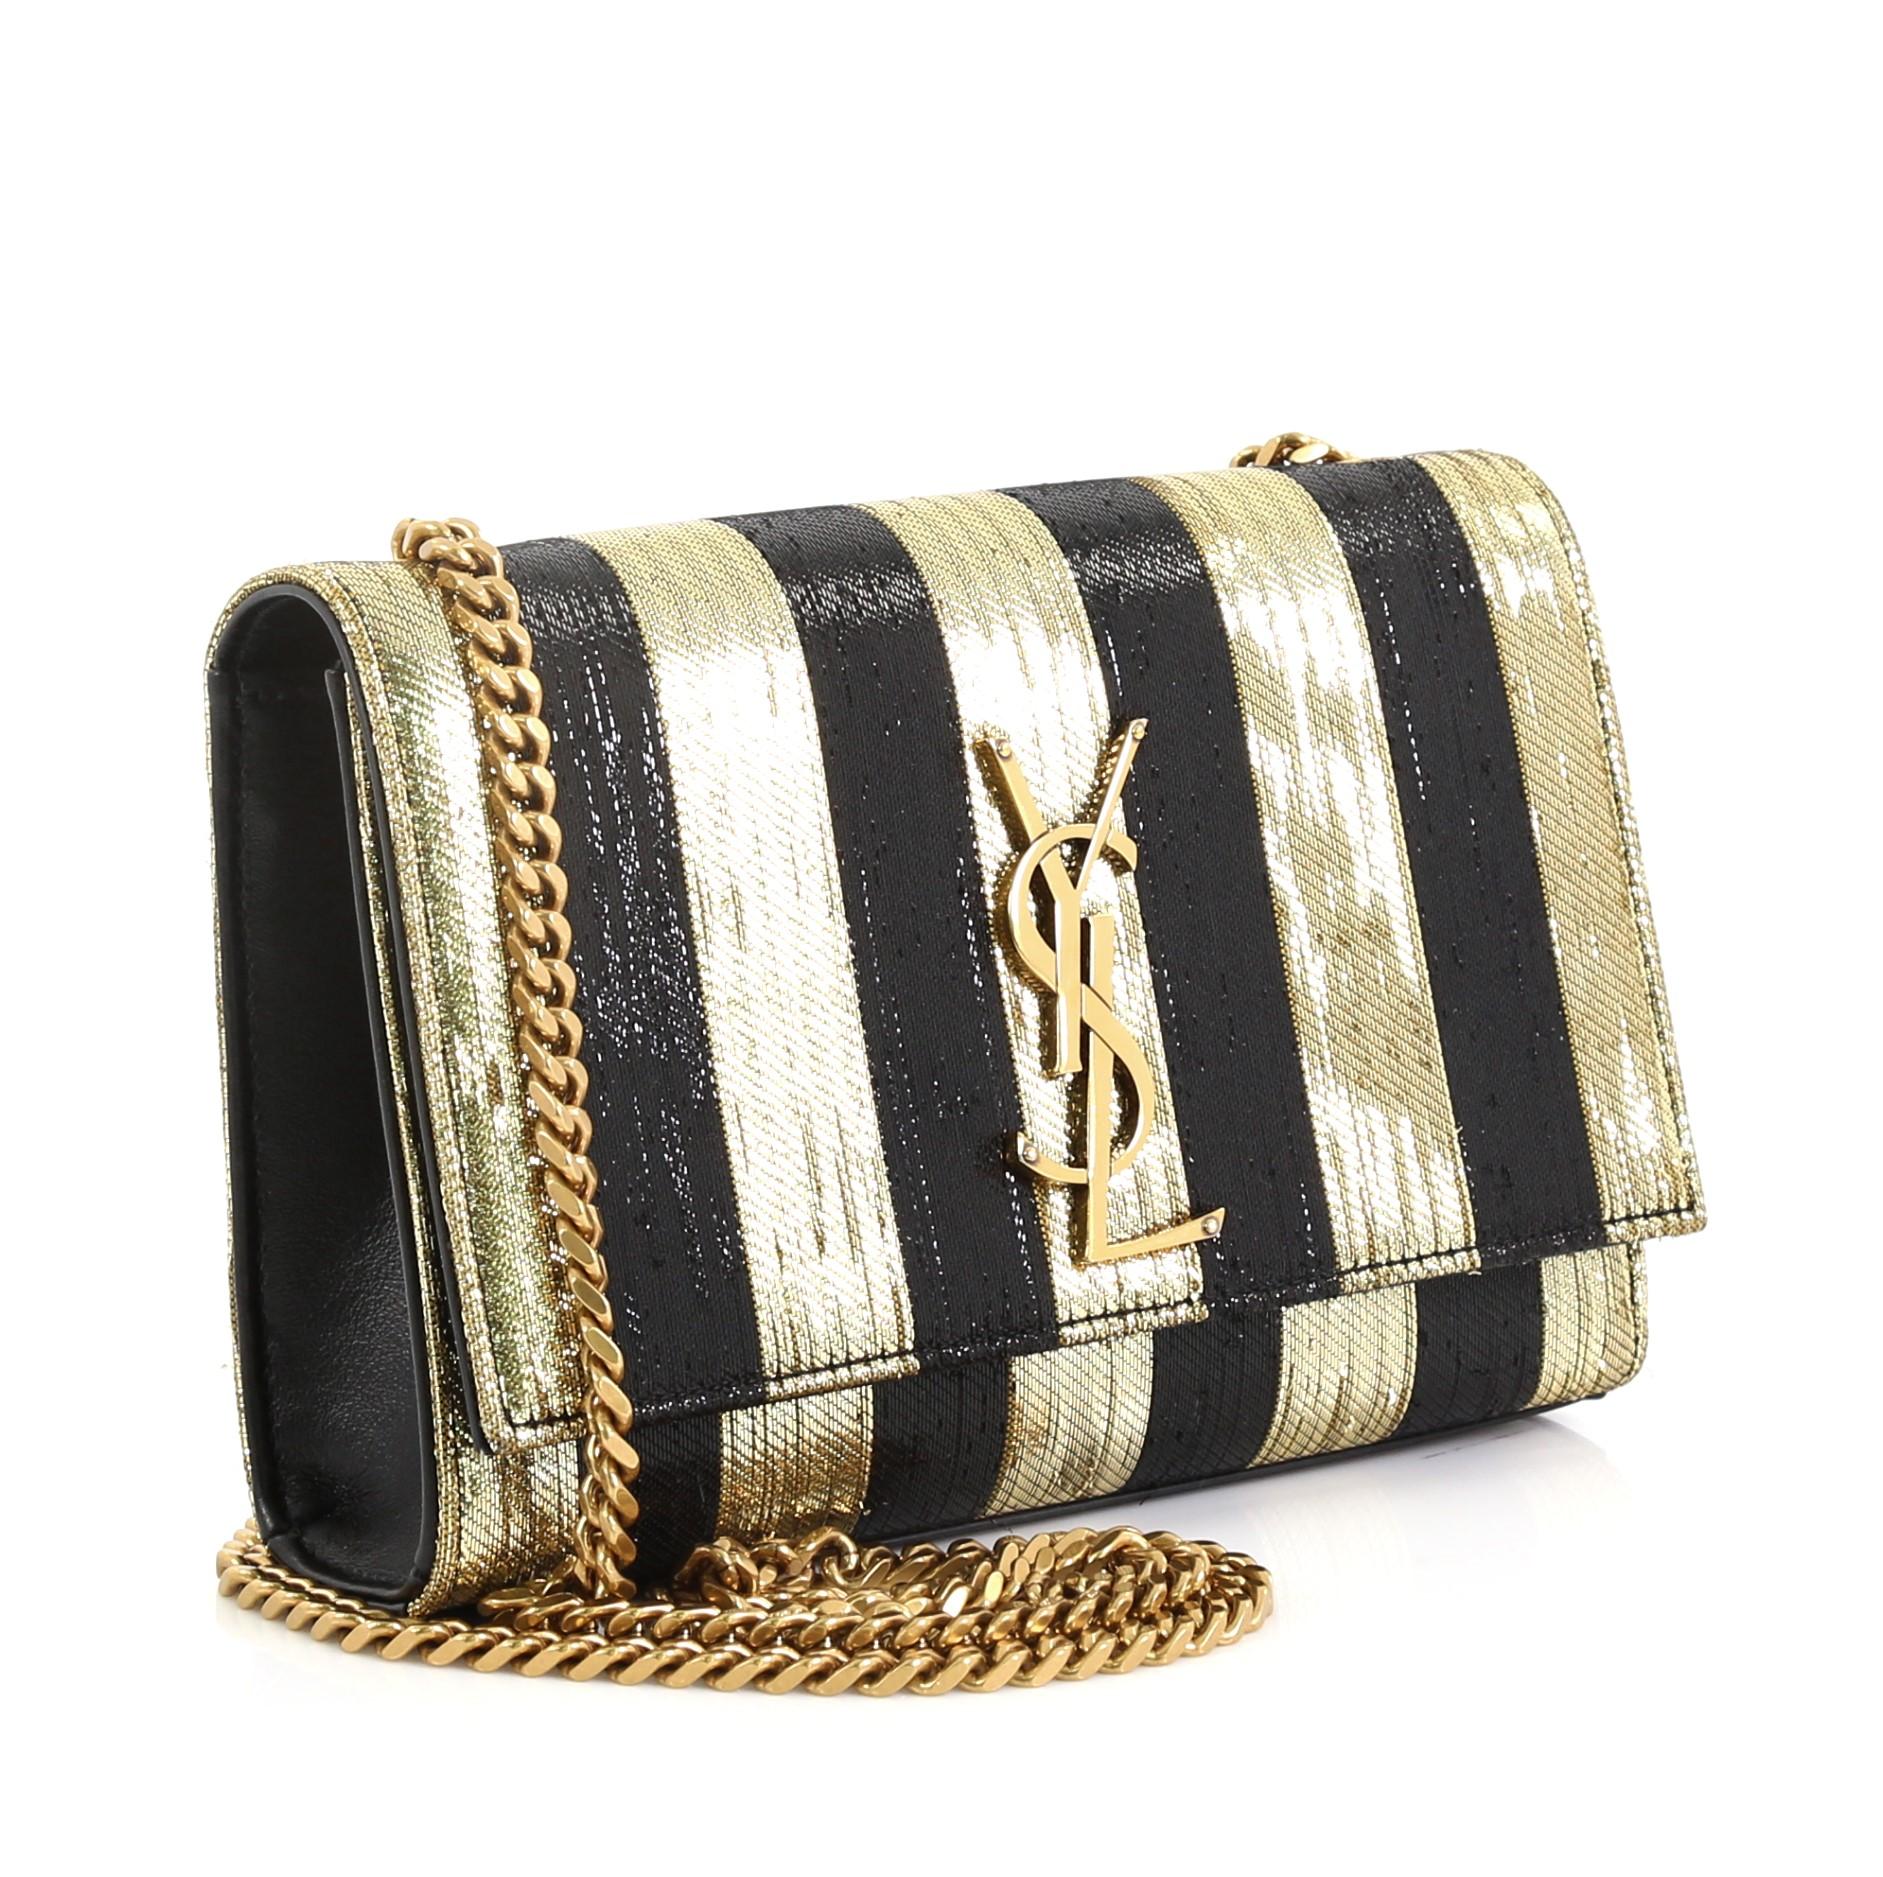 This Saint Laurent Classic Monogram Crossbody Bag Sequins Small, crafted in metallic black and gold leather with multicolor sequins, features gourmette chain strap, interlocking YSL logo at its center, and gold-tone hardware. Its magnetic snap